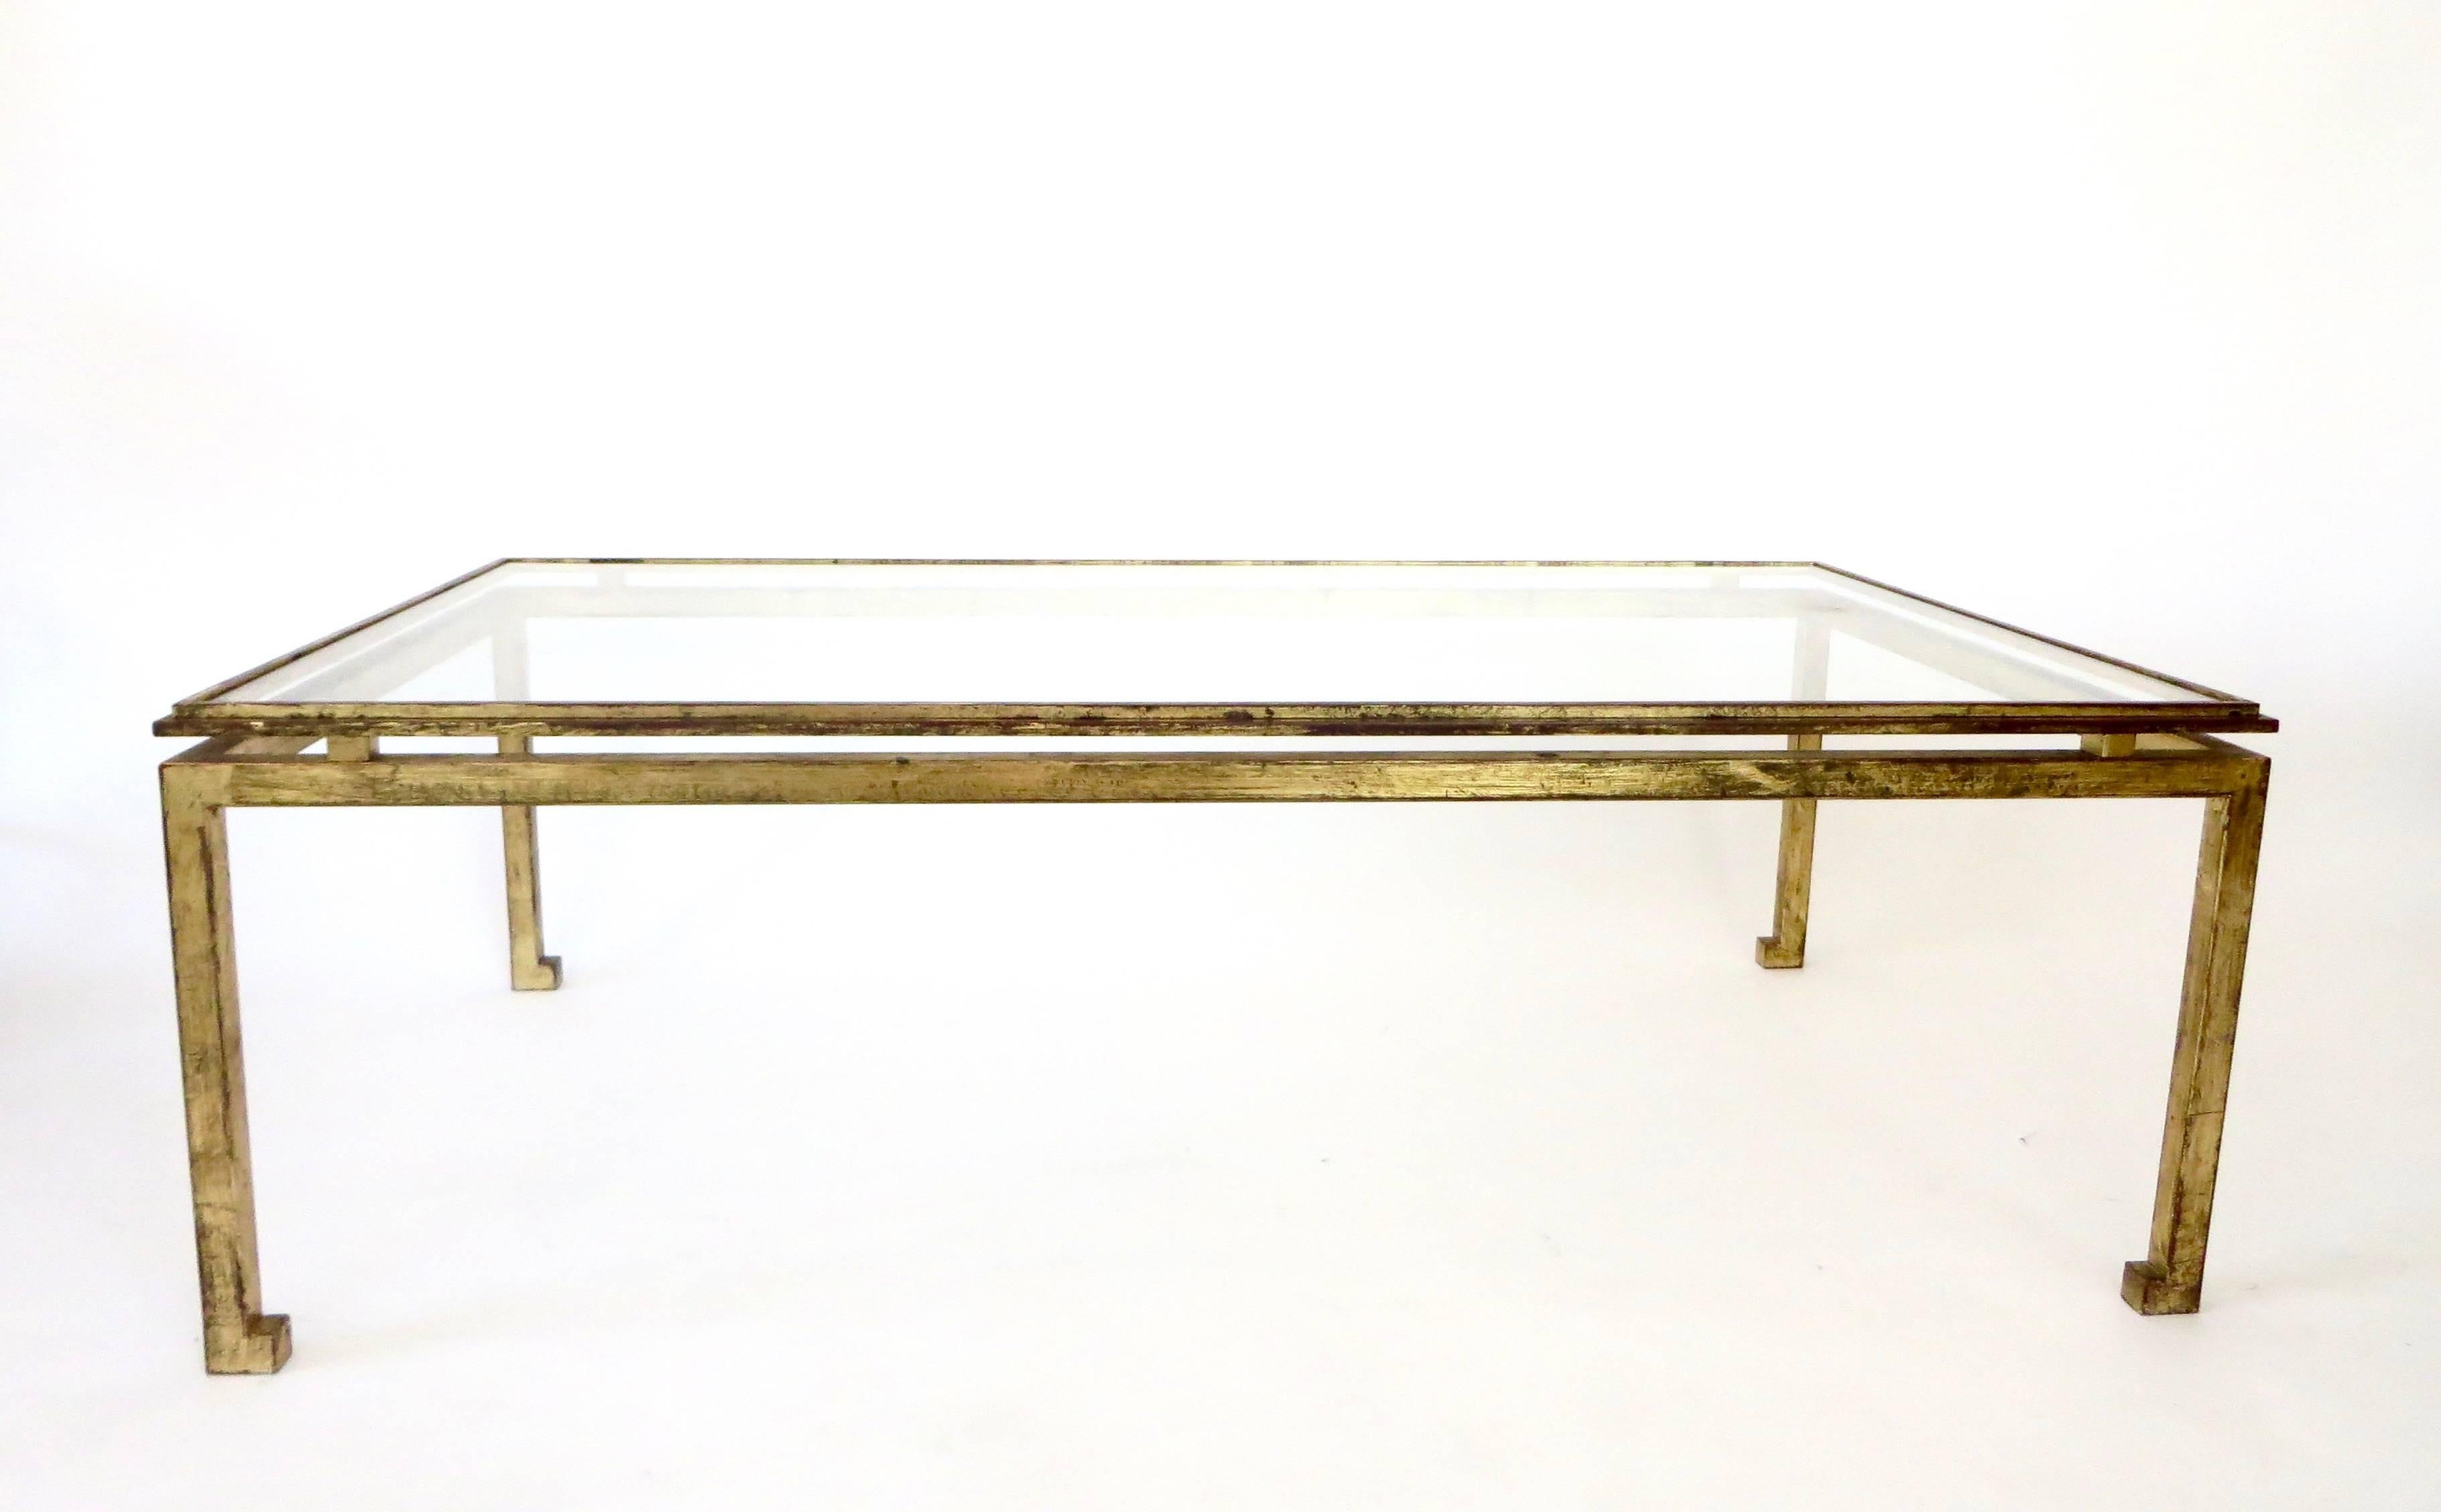 Gilt French Maison Ramsay Gilded Iron and St. Gobain Glass Plateau Coffee Table